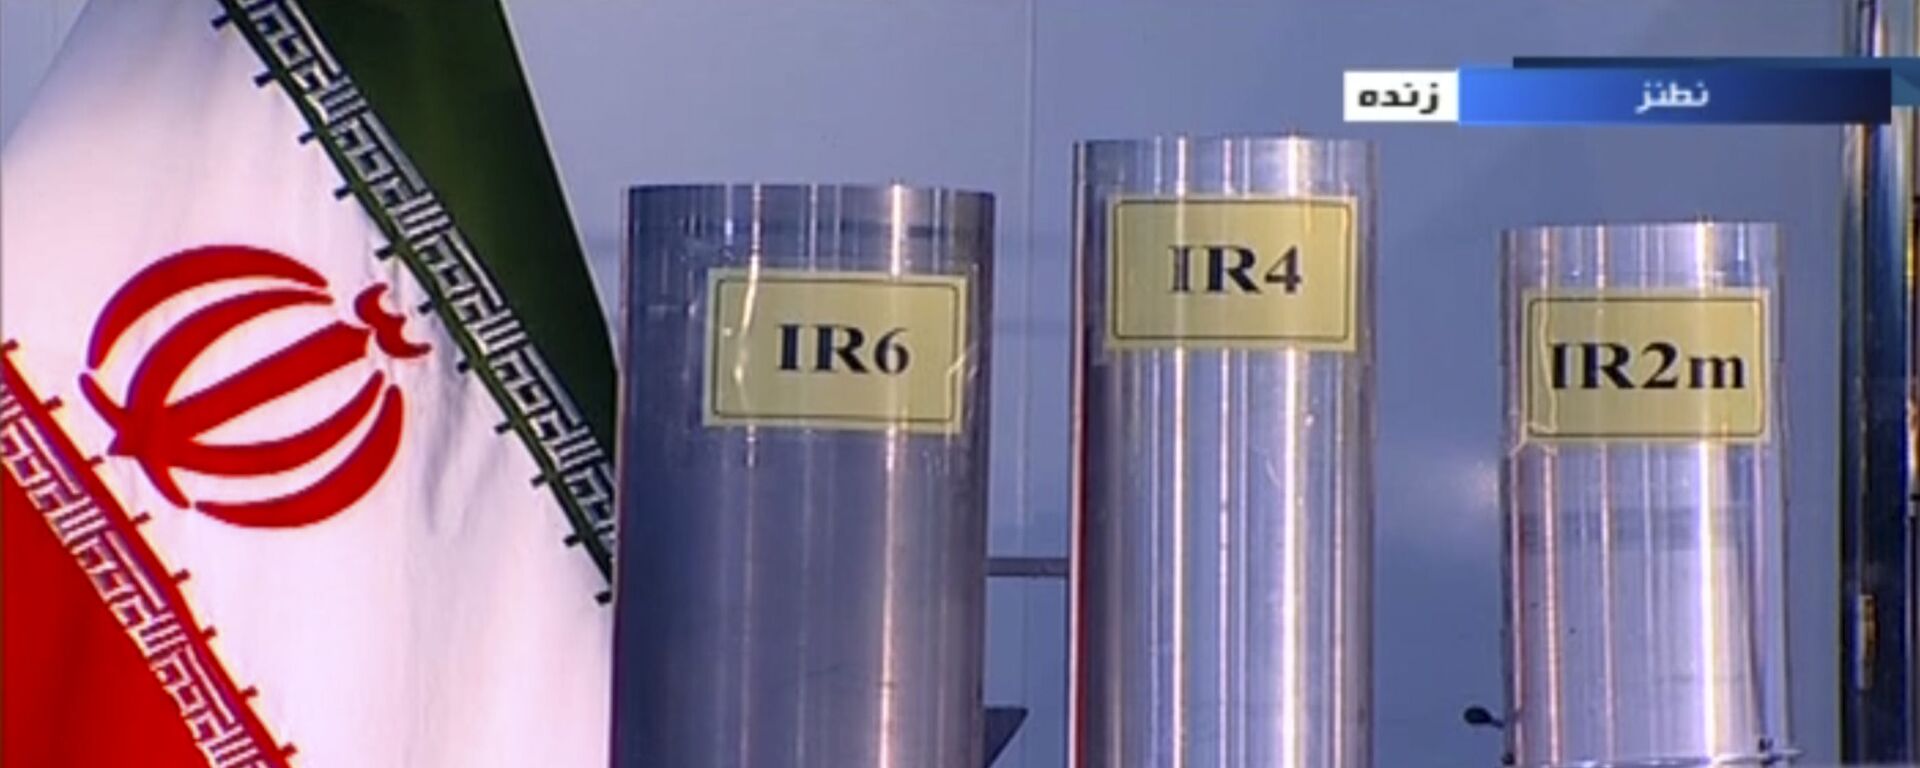 In this June 6, 2018 frame grab from Islamic Republic Iran Broadcasting, IRIB, state-run TV, three versions of domestically-built centrifuges are shown in a live TV program from Natanz, an Iranian uranium enrichment plant, in Iran - Sputnik International, 1920, 13.06.2021